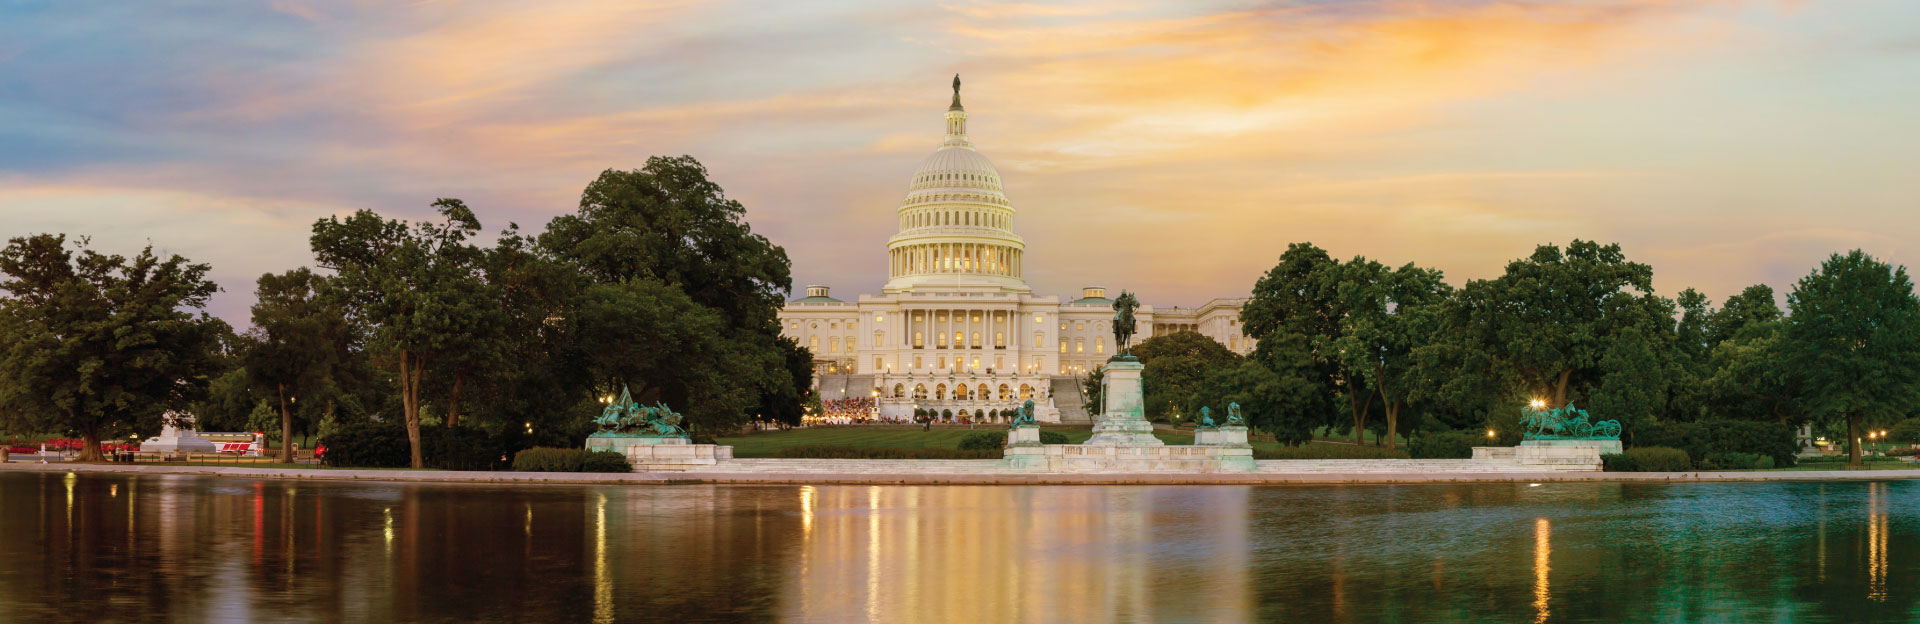 Edge to Participate in Equity in STEM Community Convening in Washington, D.C.